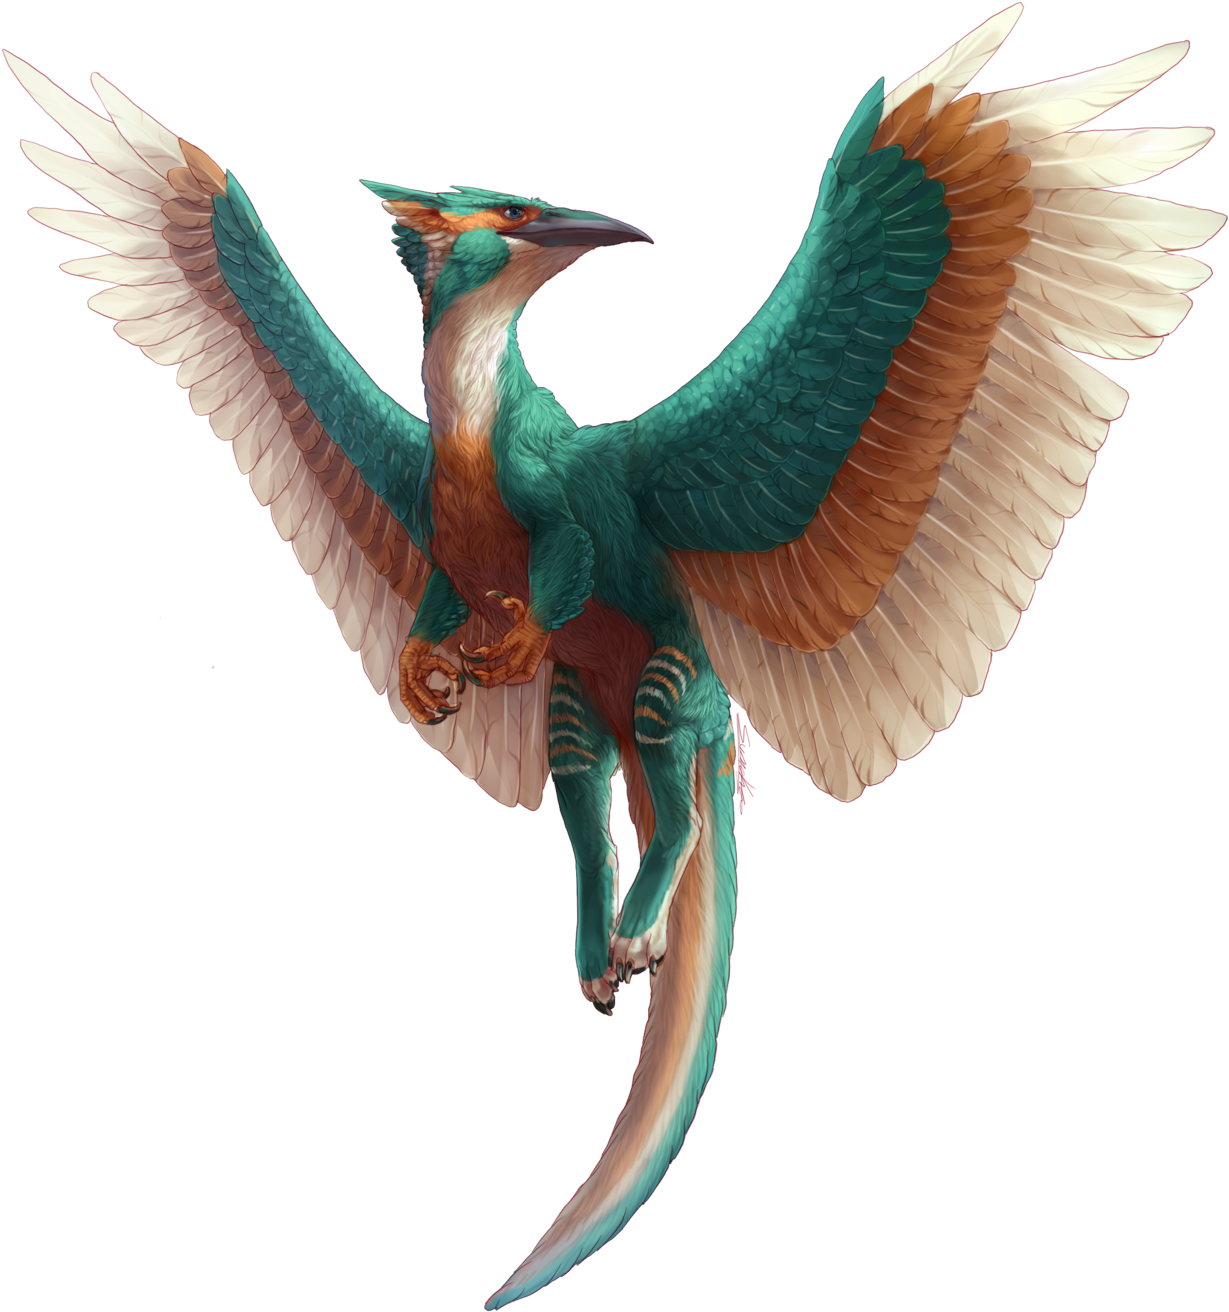 Kingfisher By Sumoka Kingfisher By Sumoka - Kingfisher And Leopard Gryphon (1280x1368)